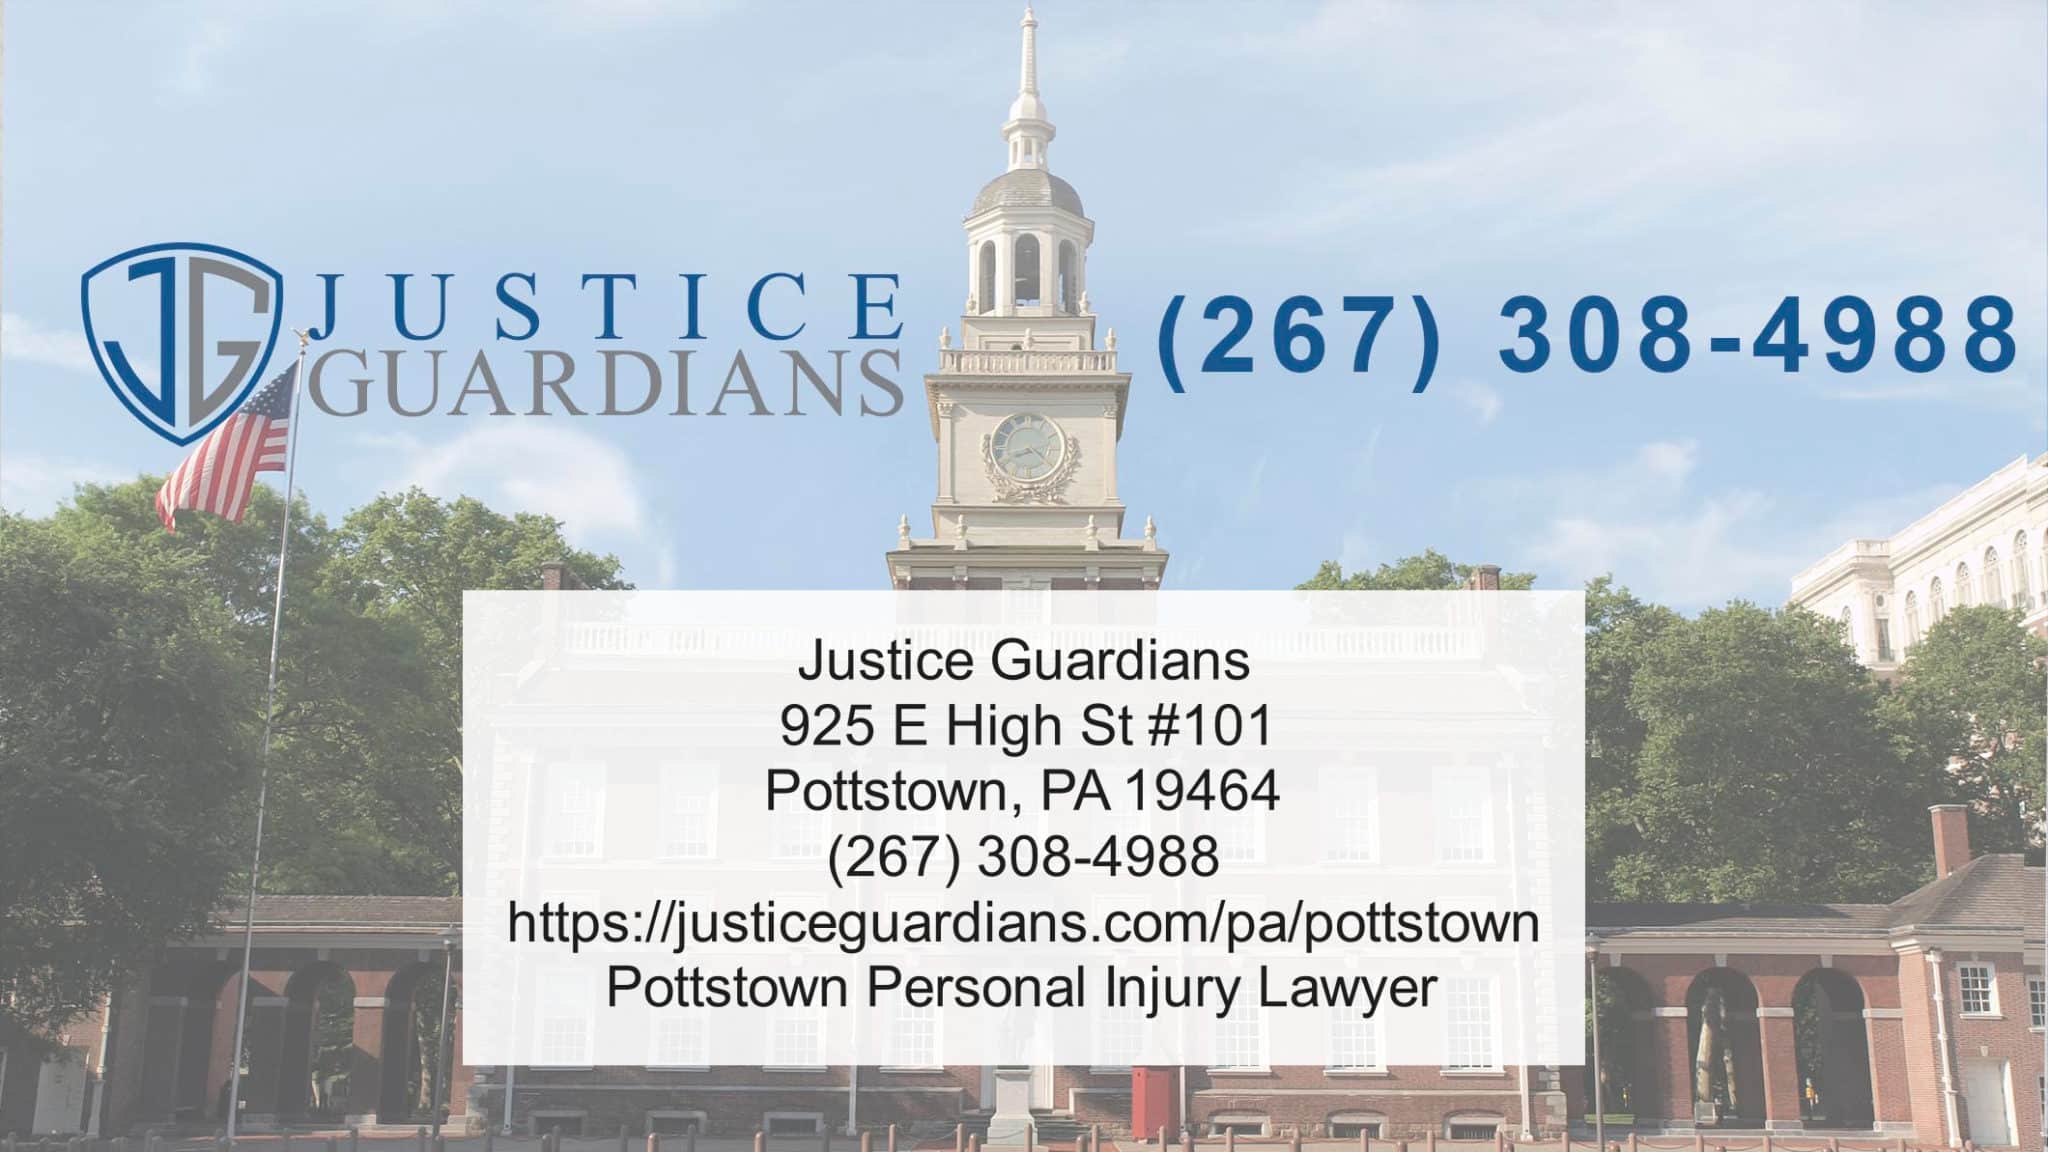 Personal-Injury-Lawyer-Near-Me-Pottstown-Justice-Guardians-1-scaled-1.jpeg